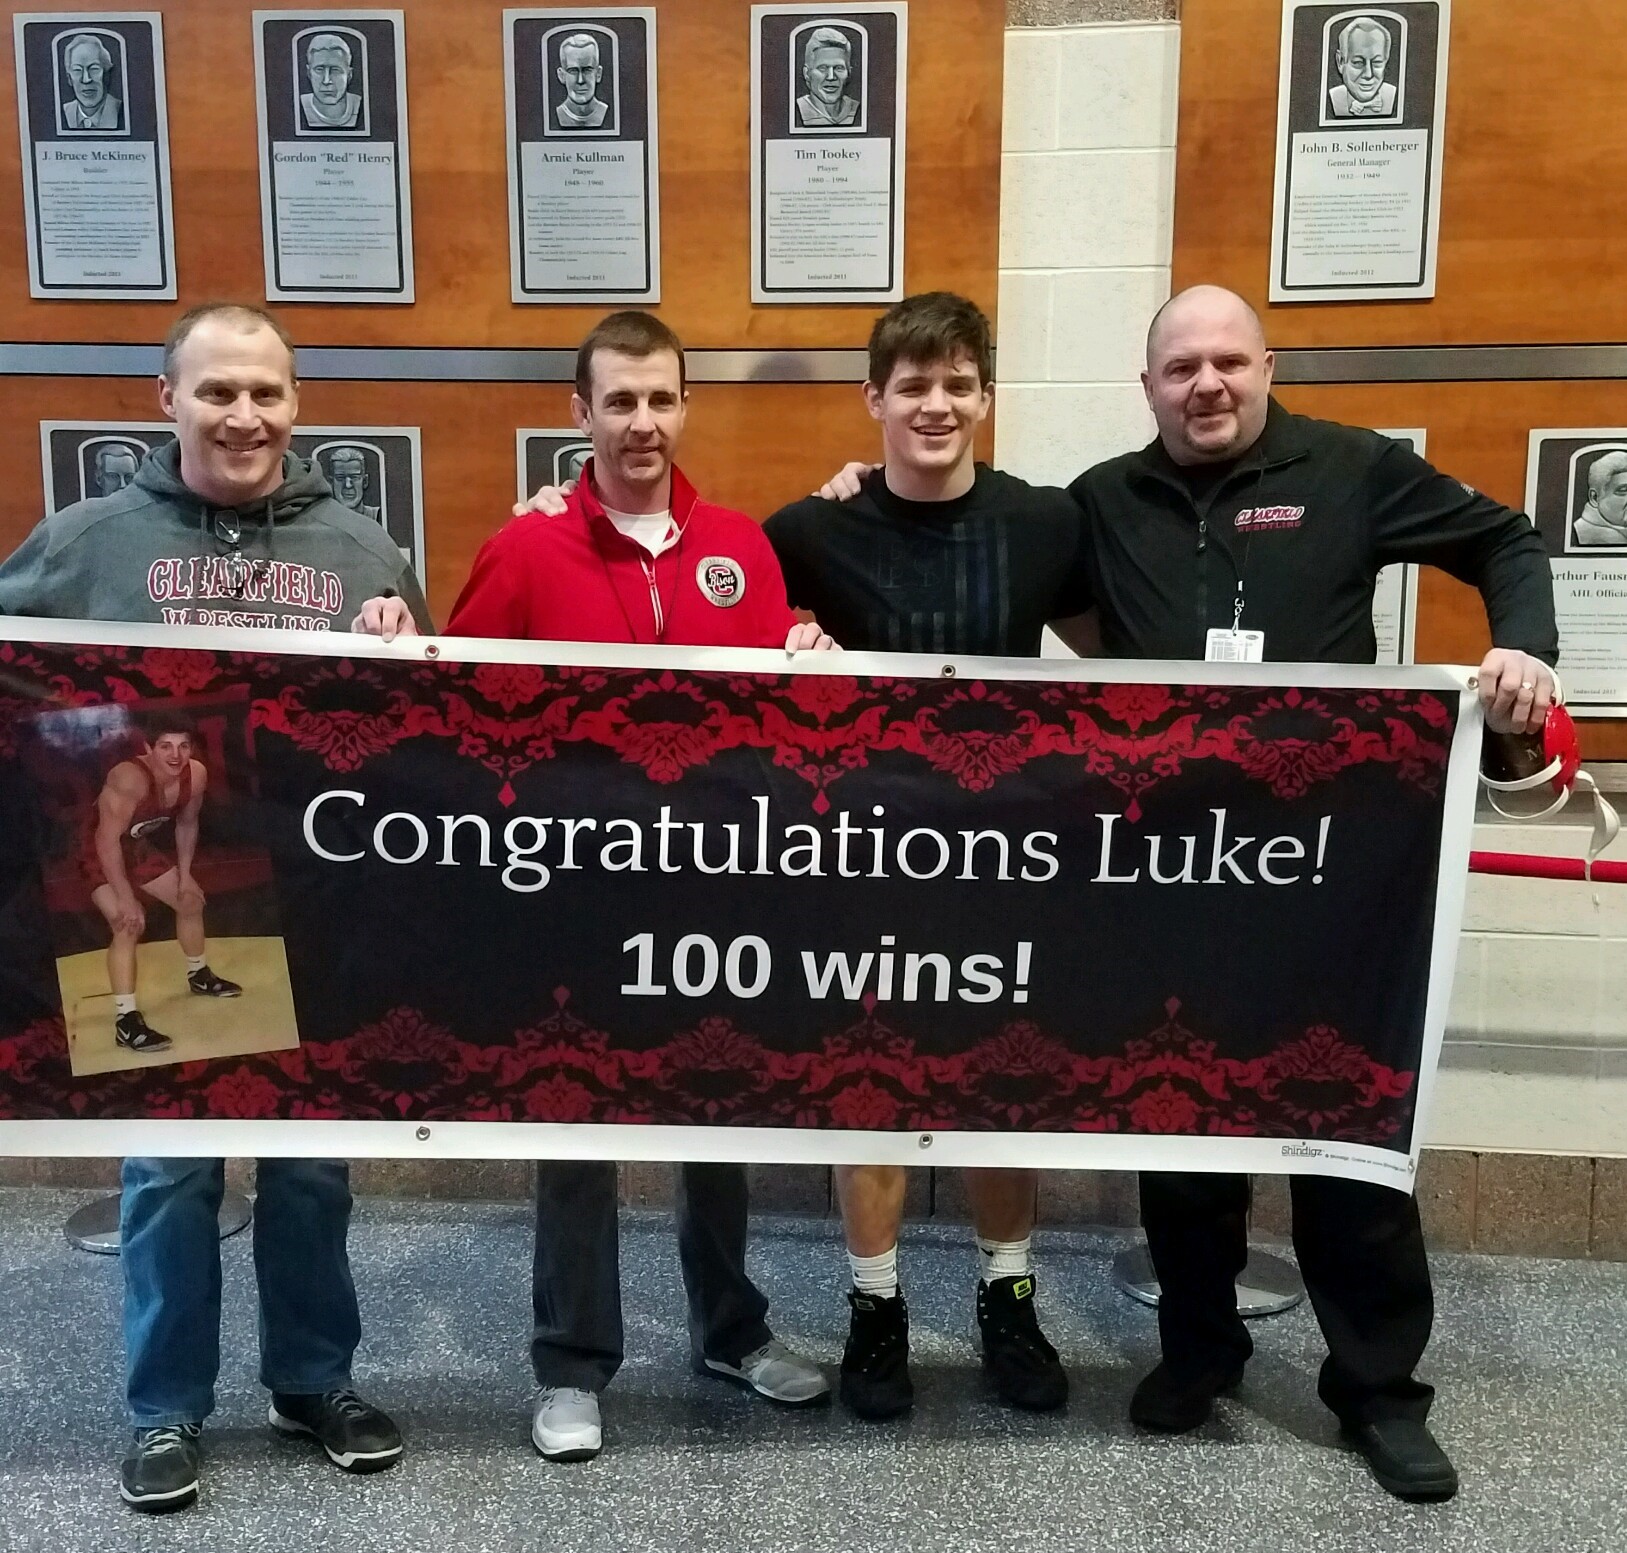 Clearfield Bison wrestler Luke McGonigal won his 100th career match in the semifinals. Shown here with varsity coaches Brent Lykens, Andy Squires, McGonigal, Jeff Aveni. (Photo by Angel Kalke)